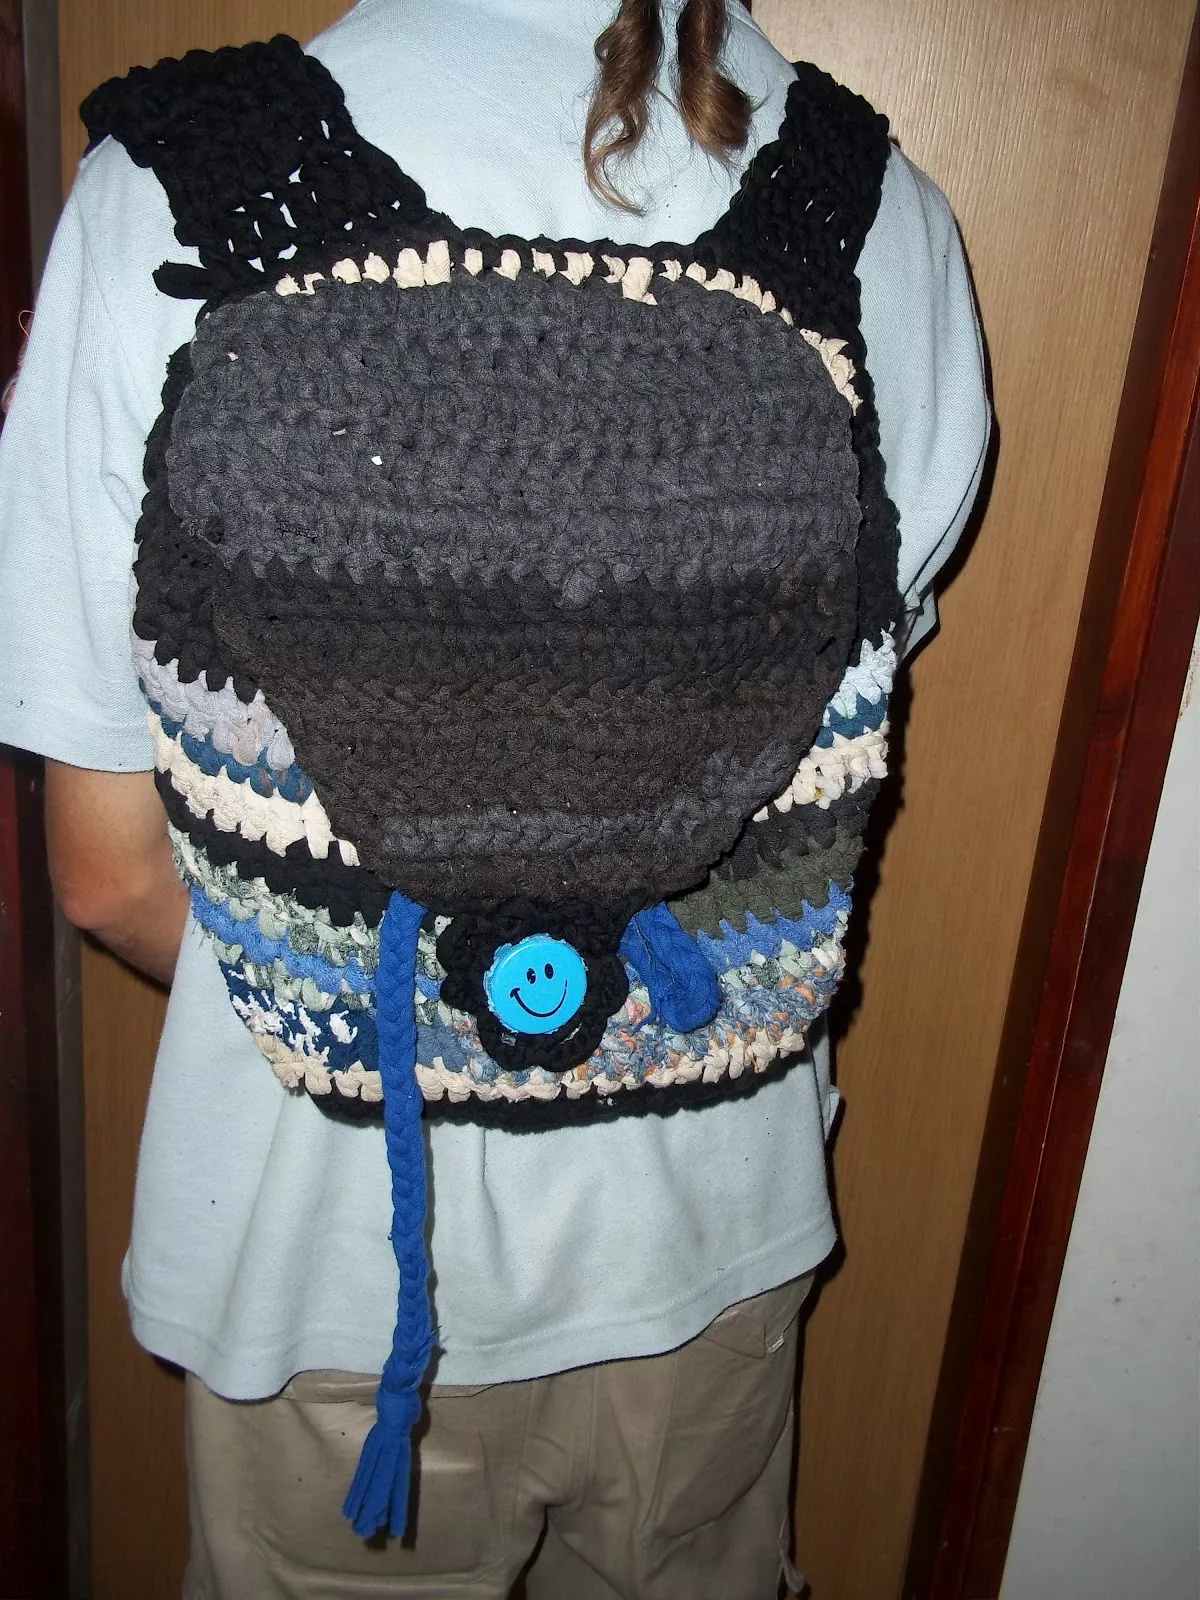 Upcycled Crochet Backpack